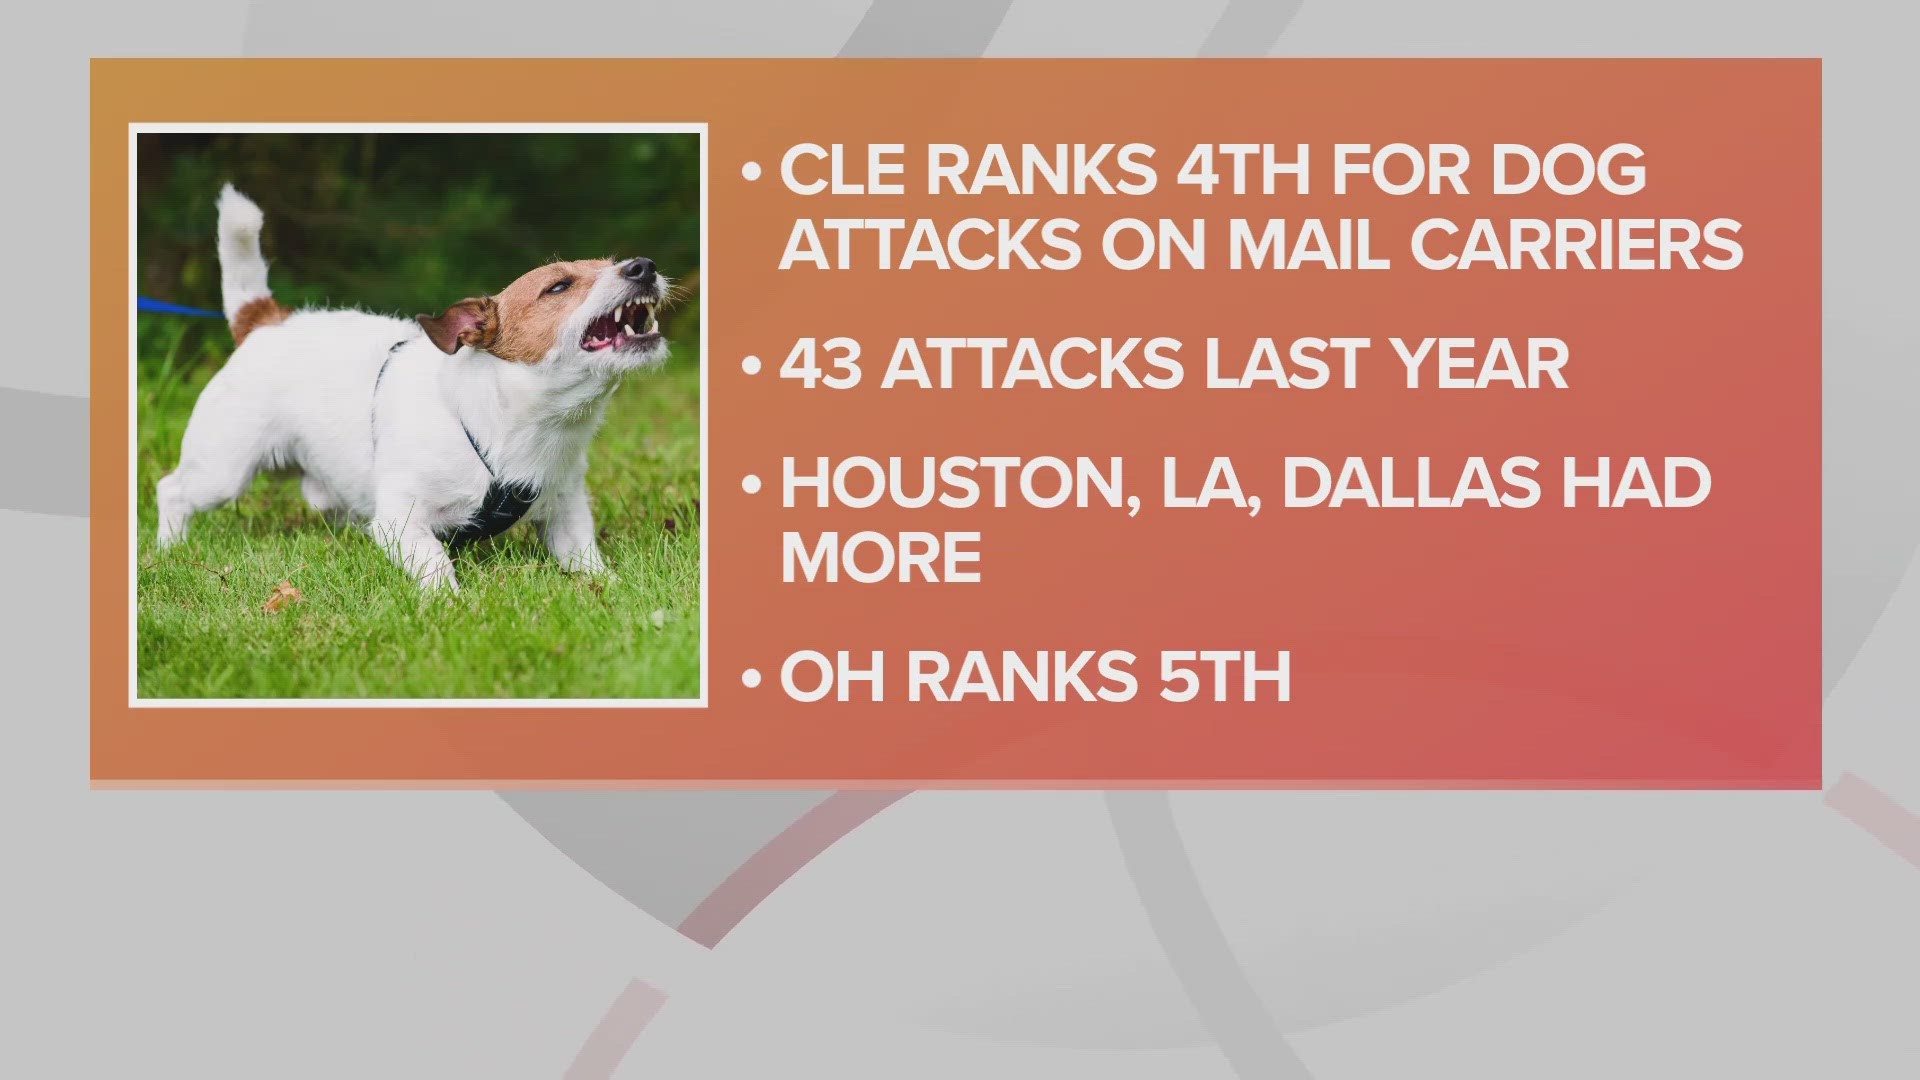 Ohio was 5th overall for dog attacks with 311 incidents involving USPS employees in 2022.